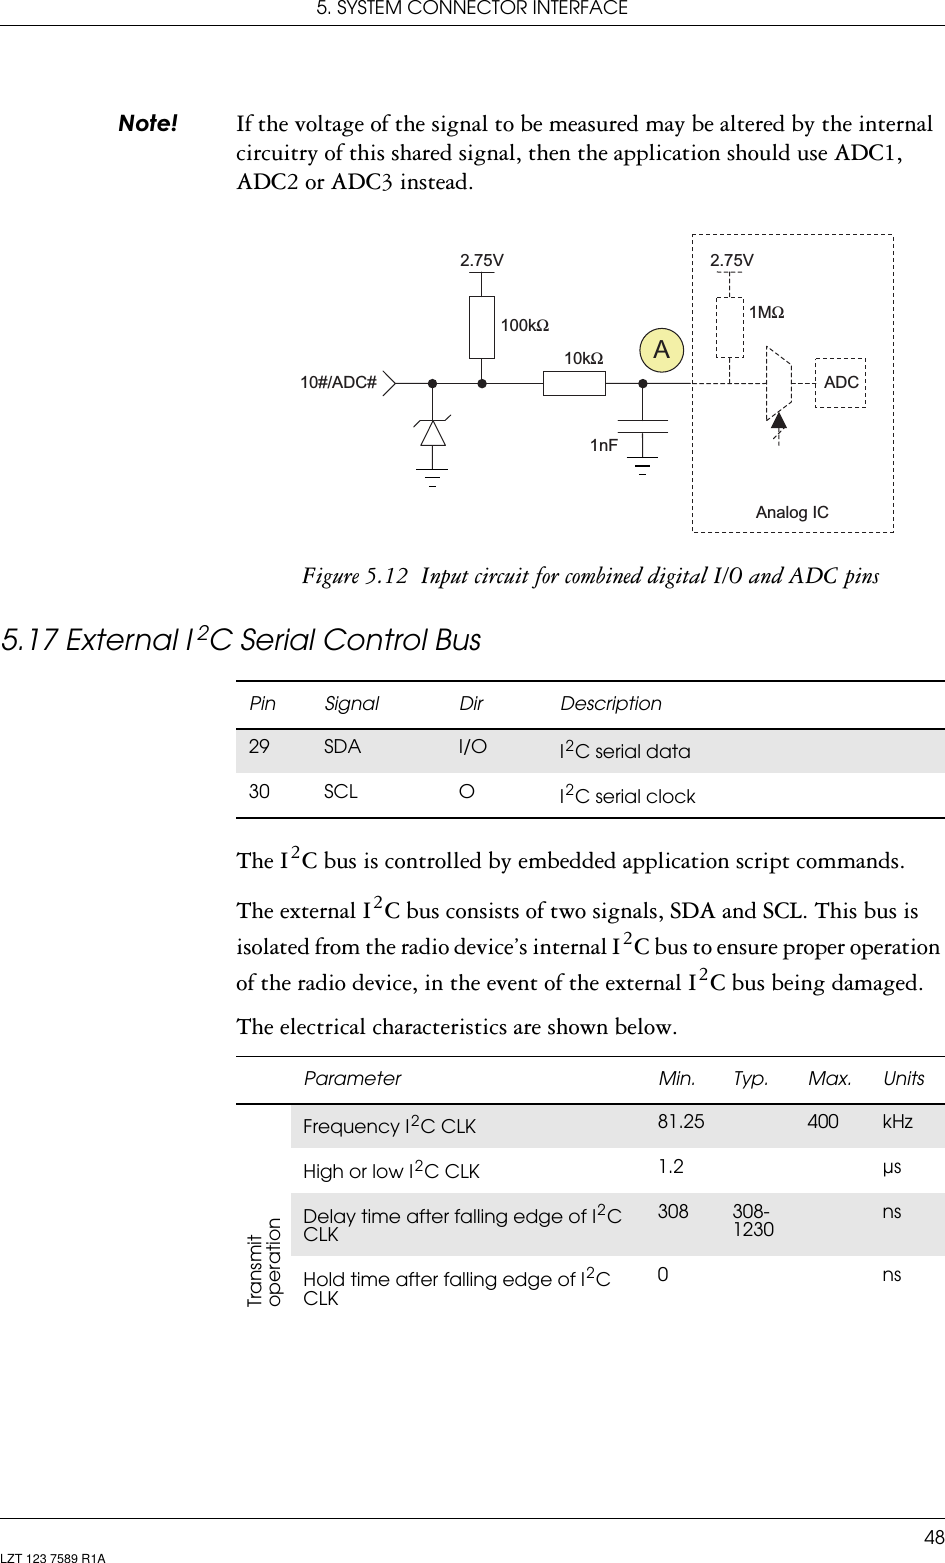 5. SYSTEM CONNECTOR INTERFACE48LZT 123 7589 R1A1RWH If the voltage of the signal to be measured may be altered by the internal circuitry of this shared signal, then the application should use ADC1, ADC2 or ADC3 instead.Figure 5.12  Input circuit for combined digital I/O and ADC pins5.17 External I 2C Serial Control BusThe I 2 C bus is controlled by embedded application script commands. The external I 2 C bus consists of two signals, SDA and SCL. This bus is isolated from the radio device’s internal I 2 C bus to ensure proper operation of the radio device, in the event of the external I 2 C bus being damaged.The electrical characteristics are shown below.2.75VADC100kΩ10kΩA2.75VAnalog IC10#/ADC#1MΩ1nFPin Signal Dir Description29 SDA I/O I 2 C serial data30 SCL O I 2 C serial clockParameter Min. Typ. Max. UnitsTransmitoperationFrequency I 2 C CLK 81.25 400 kHzHigh or low I 2 C CLK 1.2 µsDelay time after falling edge of I 2 C CLK308 308-1230nsHold time after falling edge of I 2 C CLK0ns